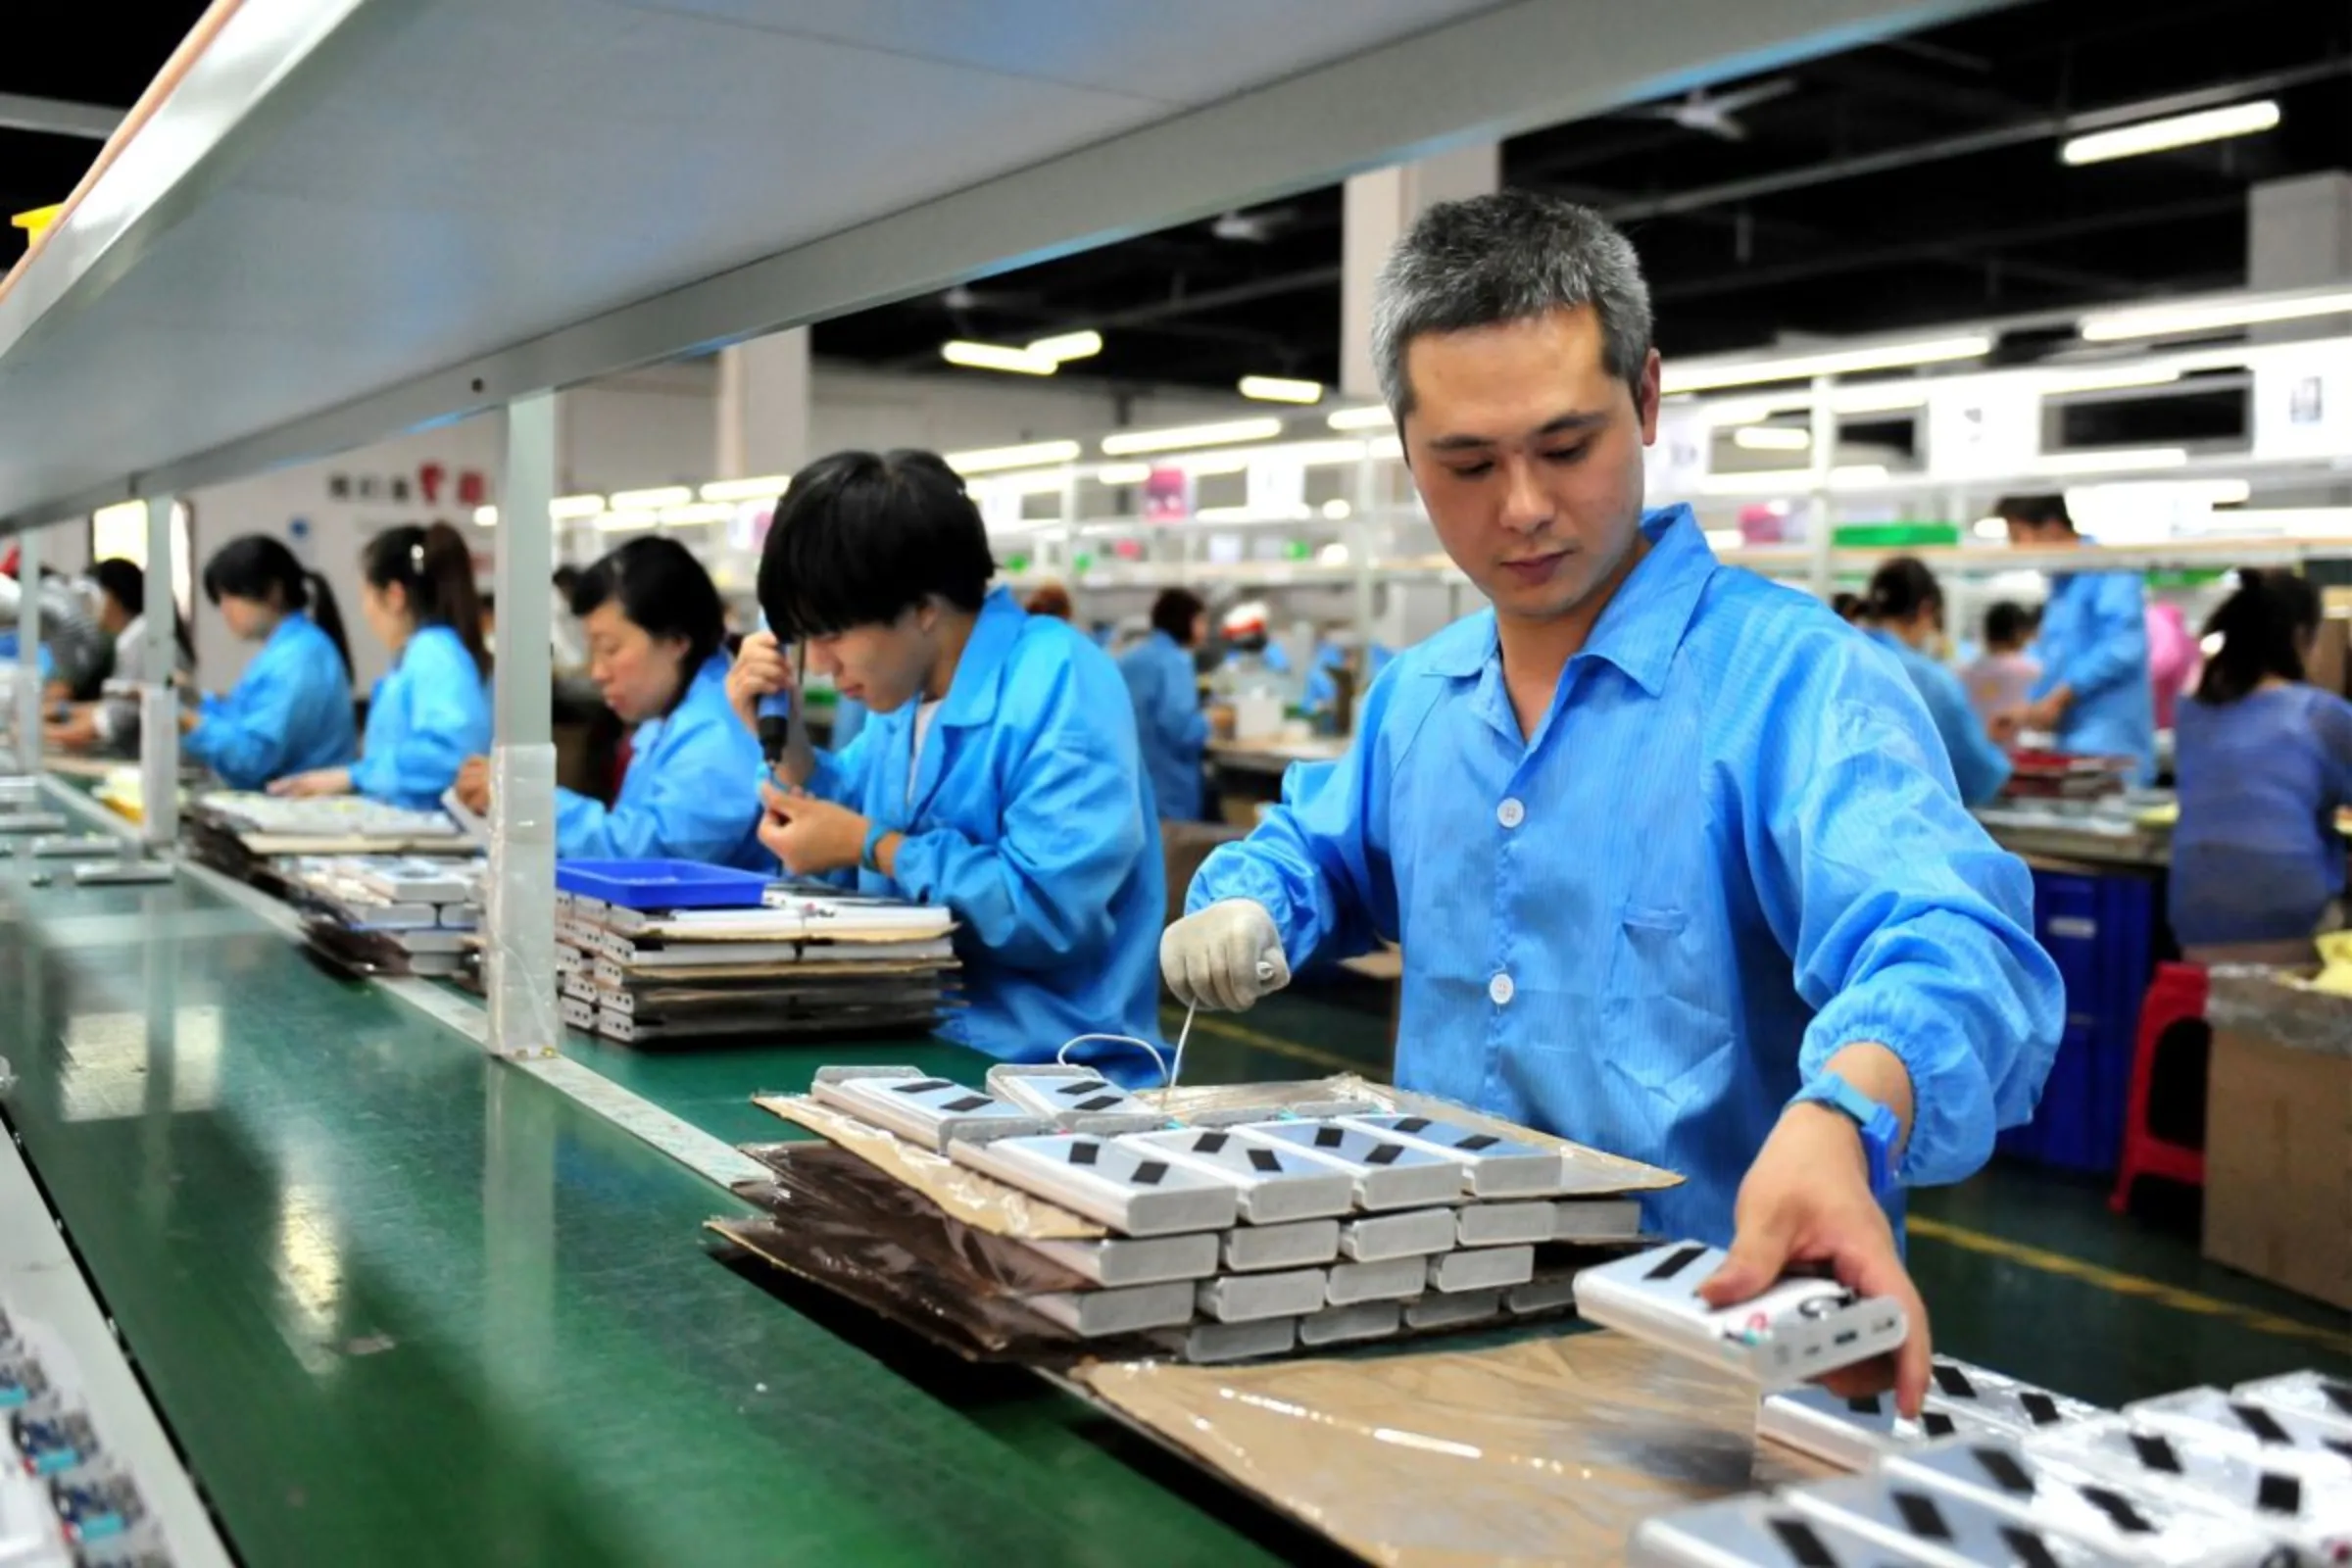 Employees work on a production line manufacturing lithium battery products at a factory in Yichang, Hubei province, China May 28, 2019